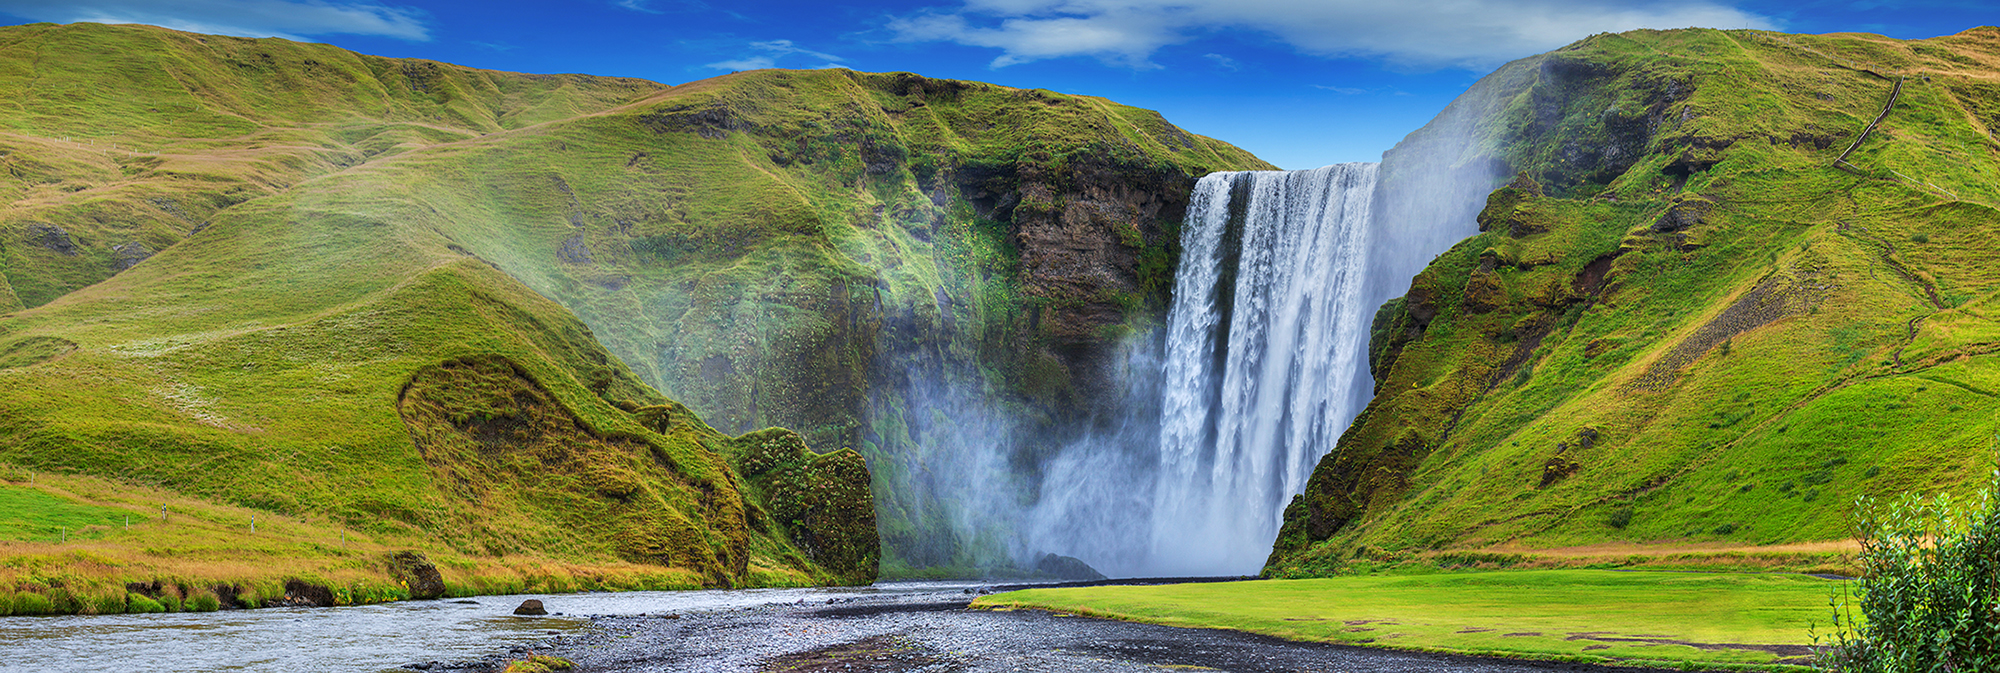 Skogafoss waterfall is a natural wonder of South Iceland